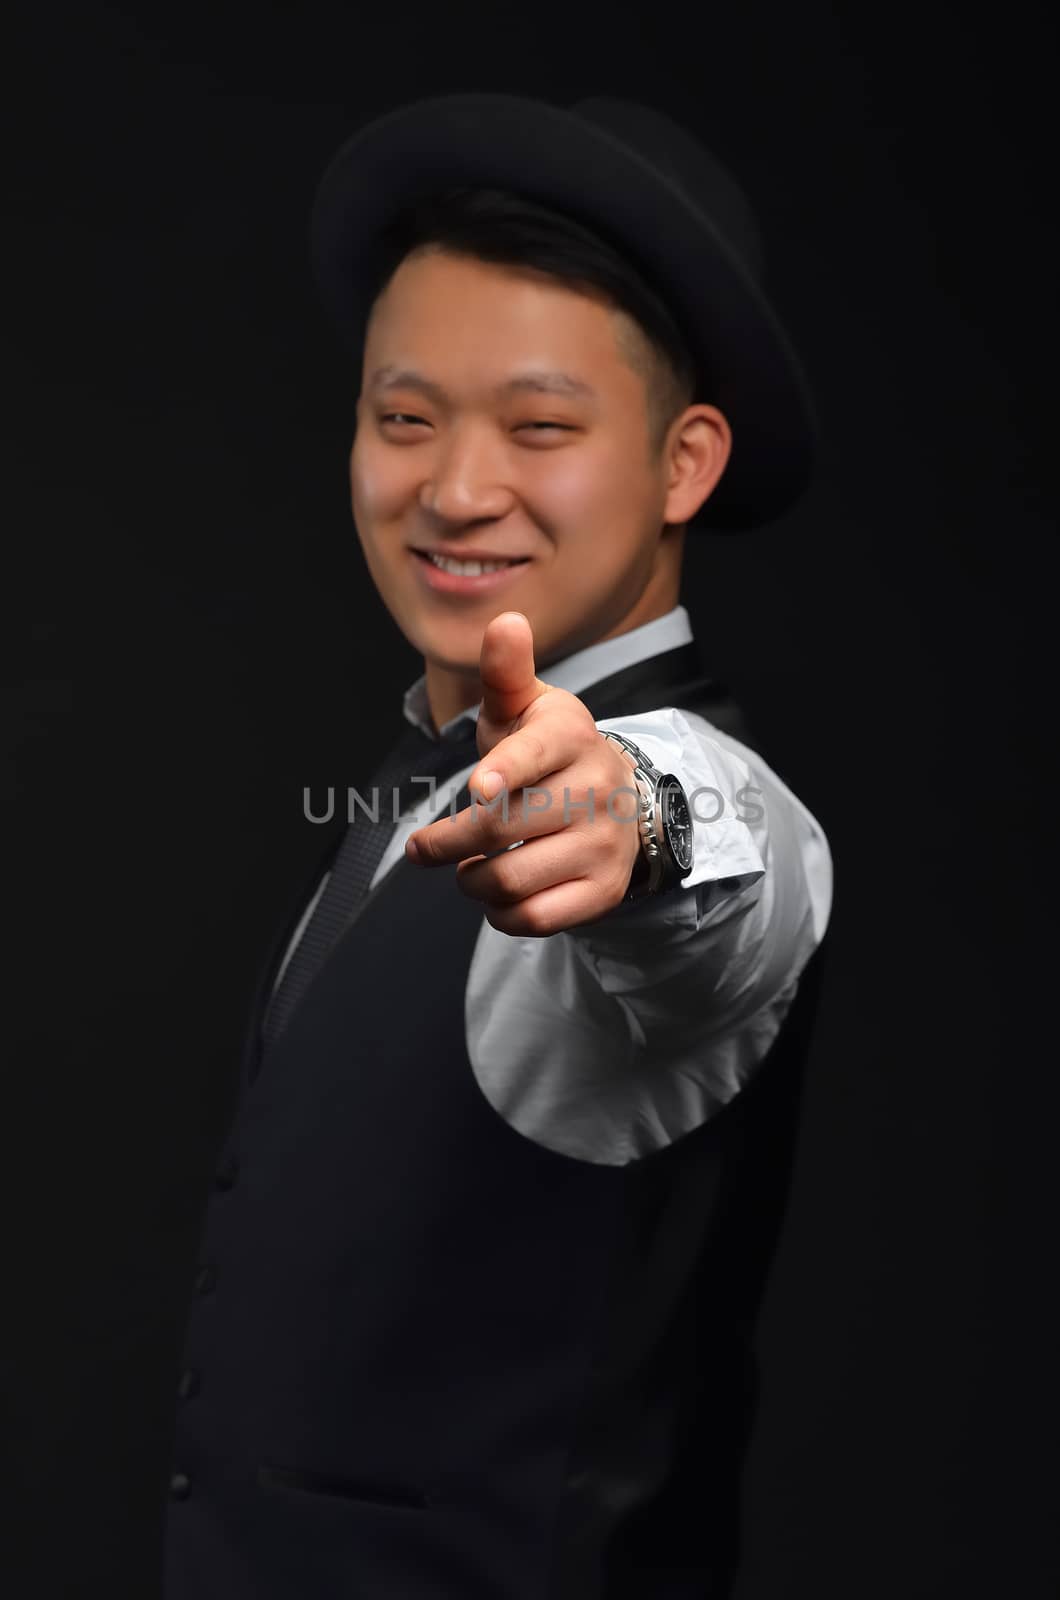 A smiling young Asian man looks at the camera and shows his finger